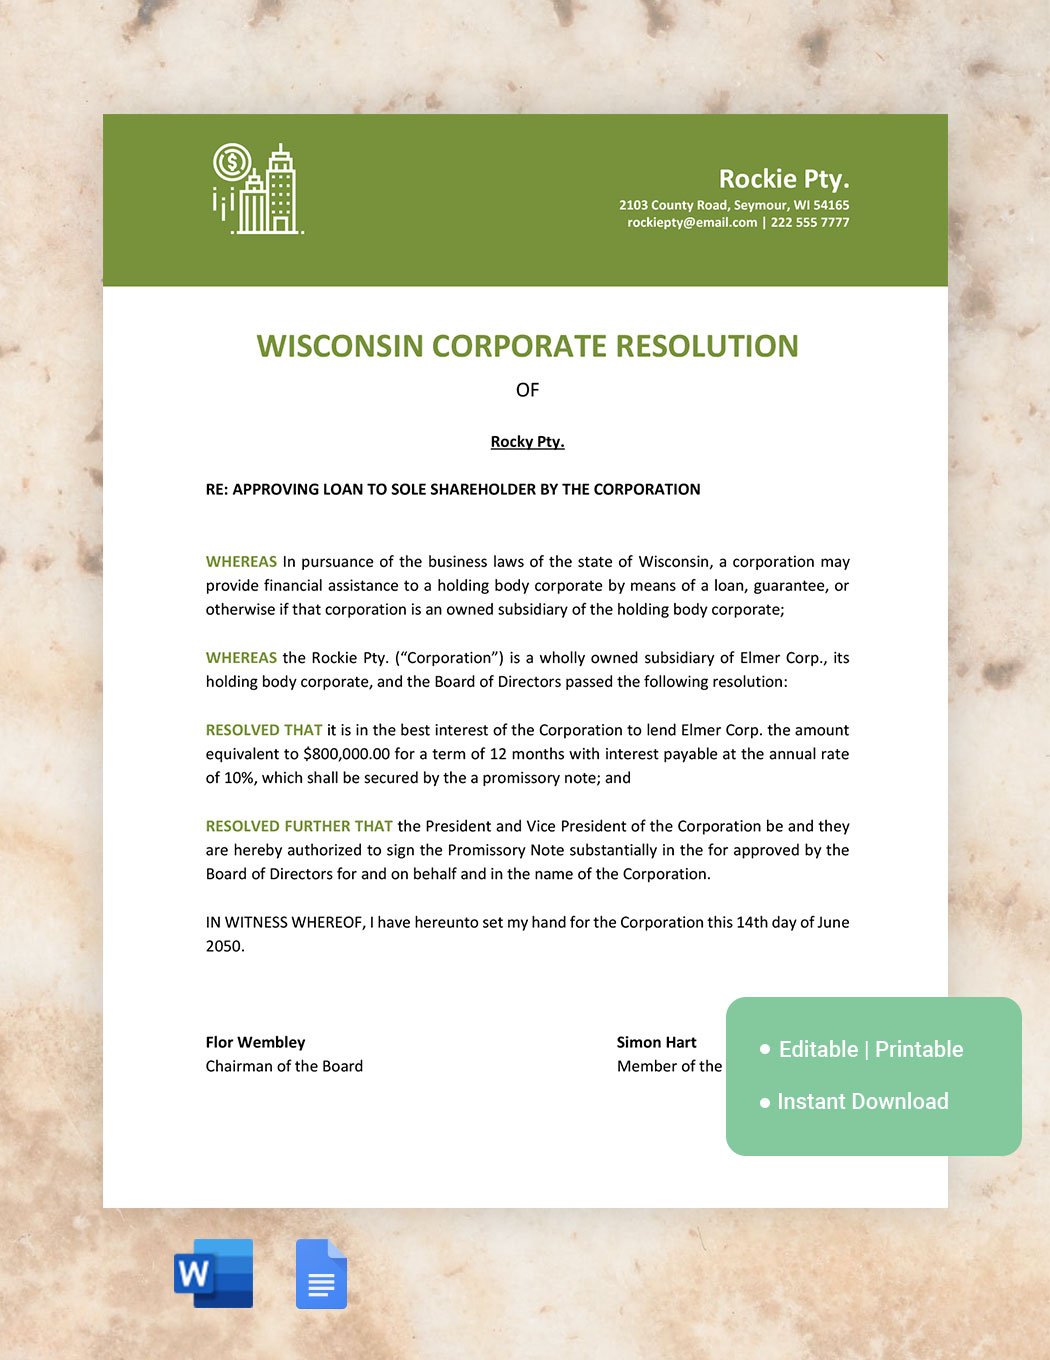 Wisconsin Corporate Resolution Template in Word, Google Docs